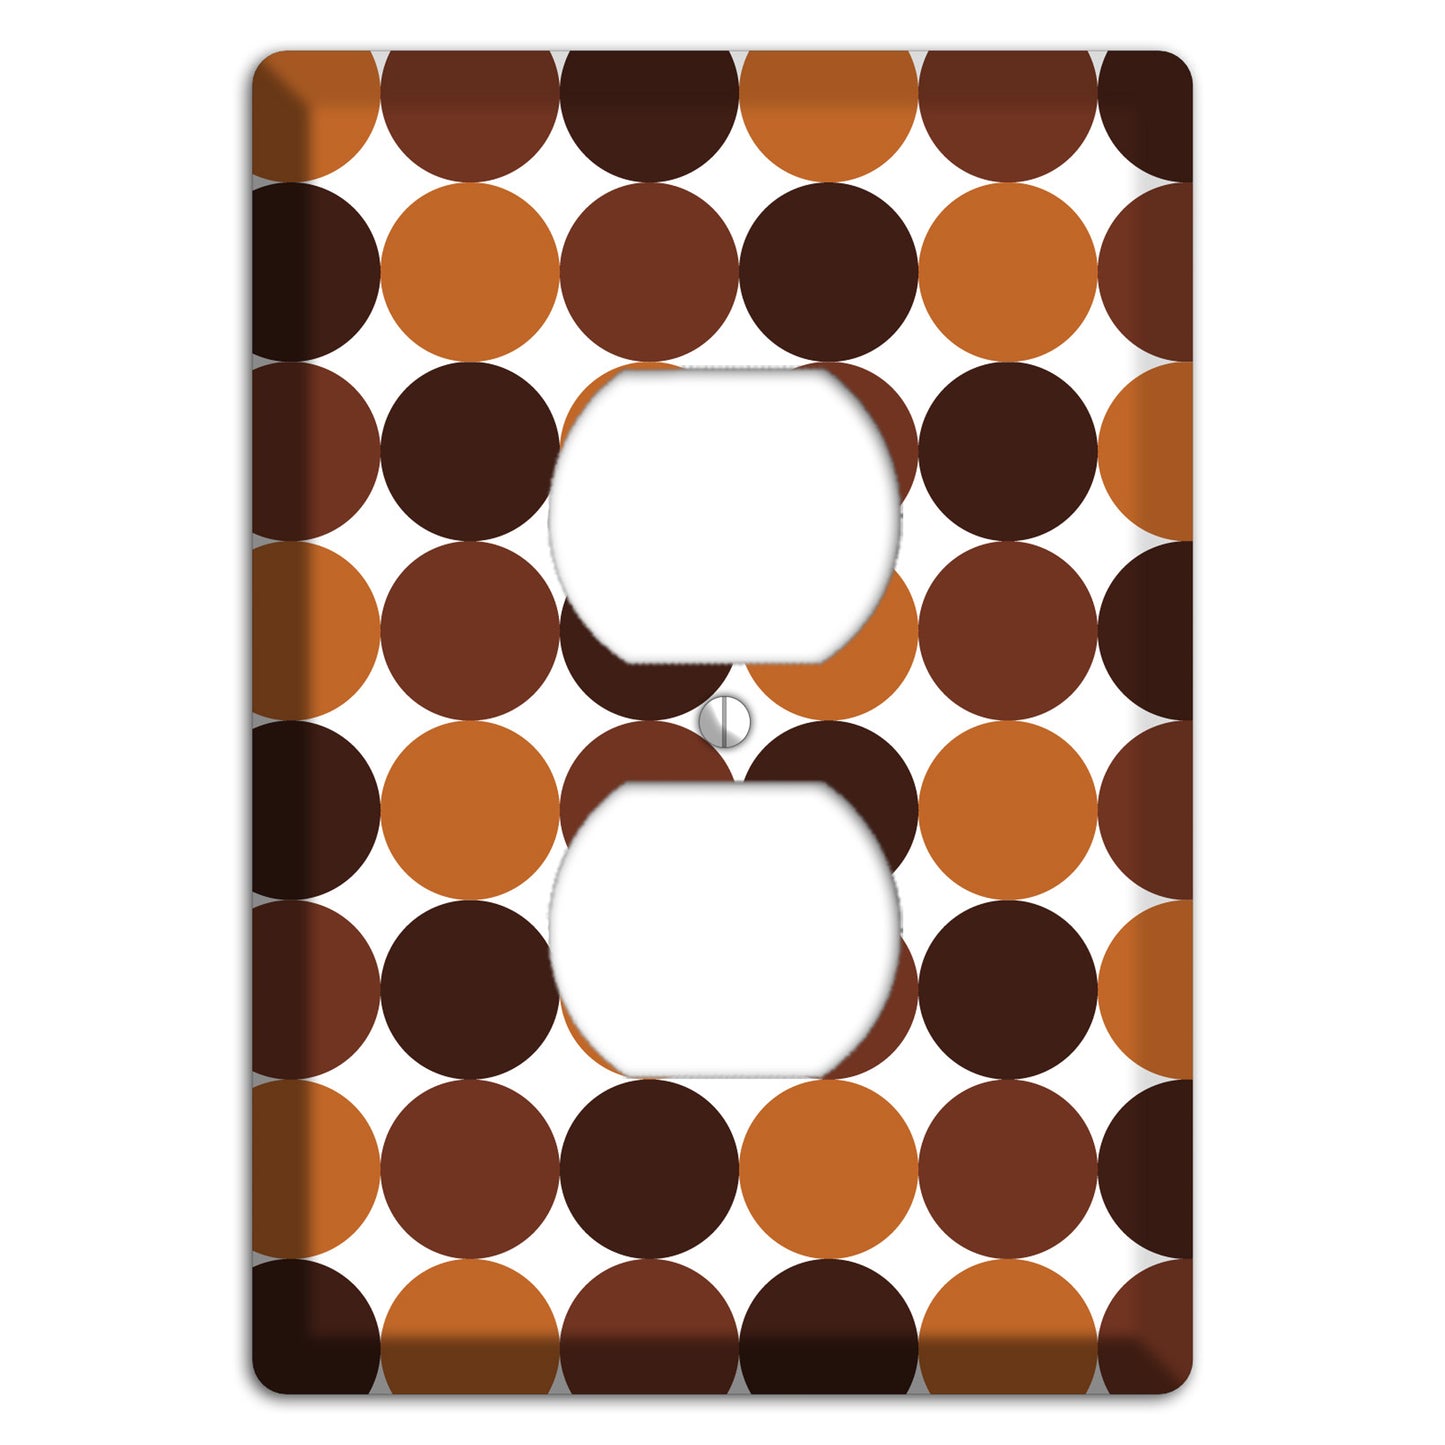 Multi Brown Tiled Dots Duplex Outlet Wallplate